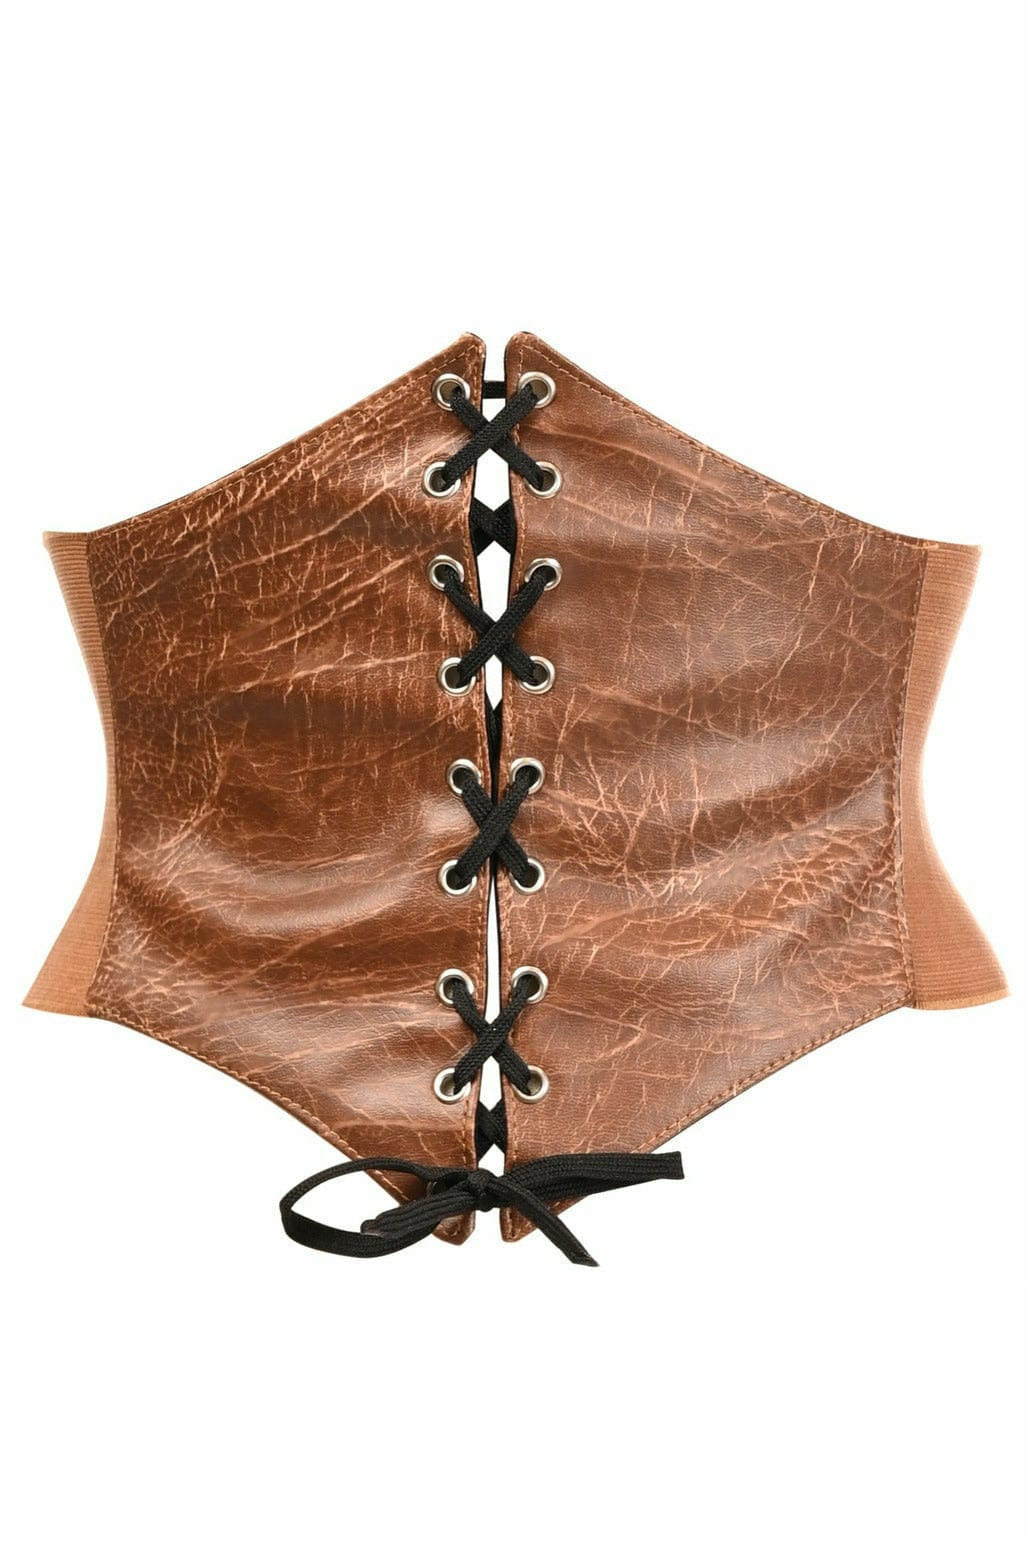 Laced Leather Corset Belt